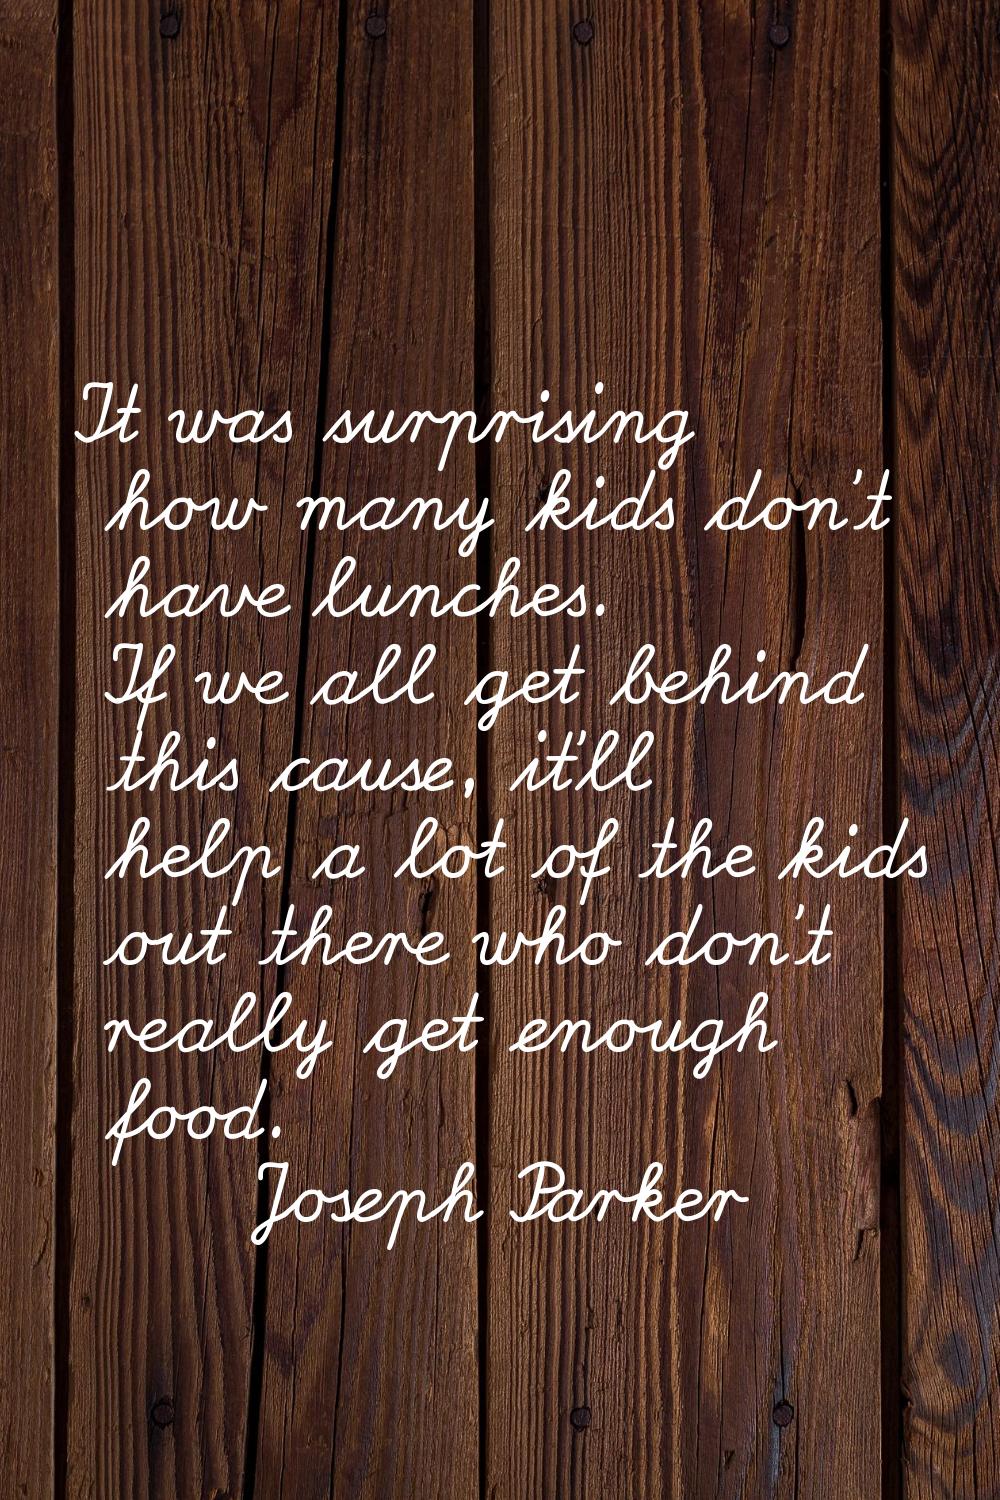 It was surprising how many kids don't have lunches. If we all get behind this cause, it'll help a l